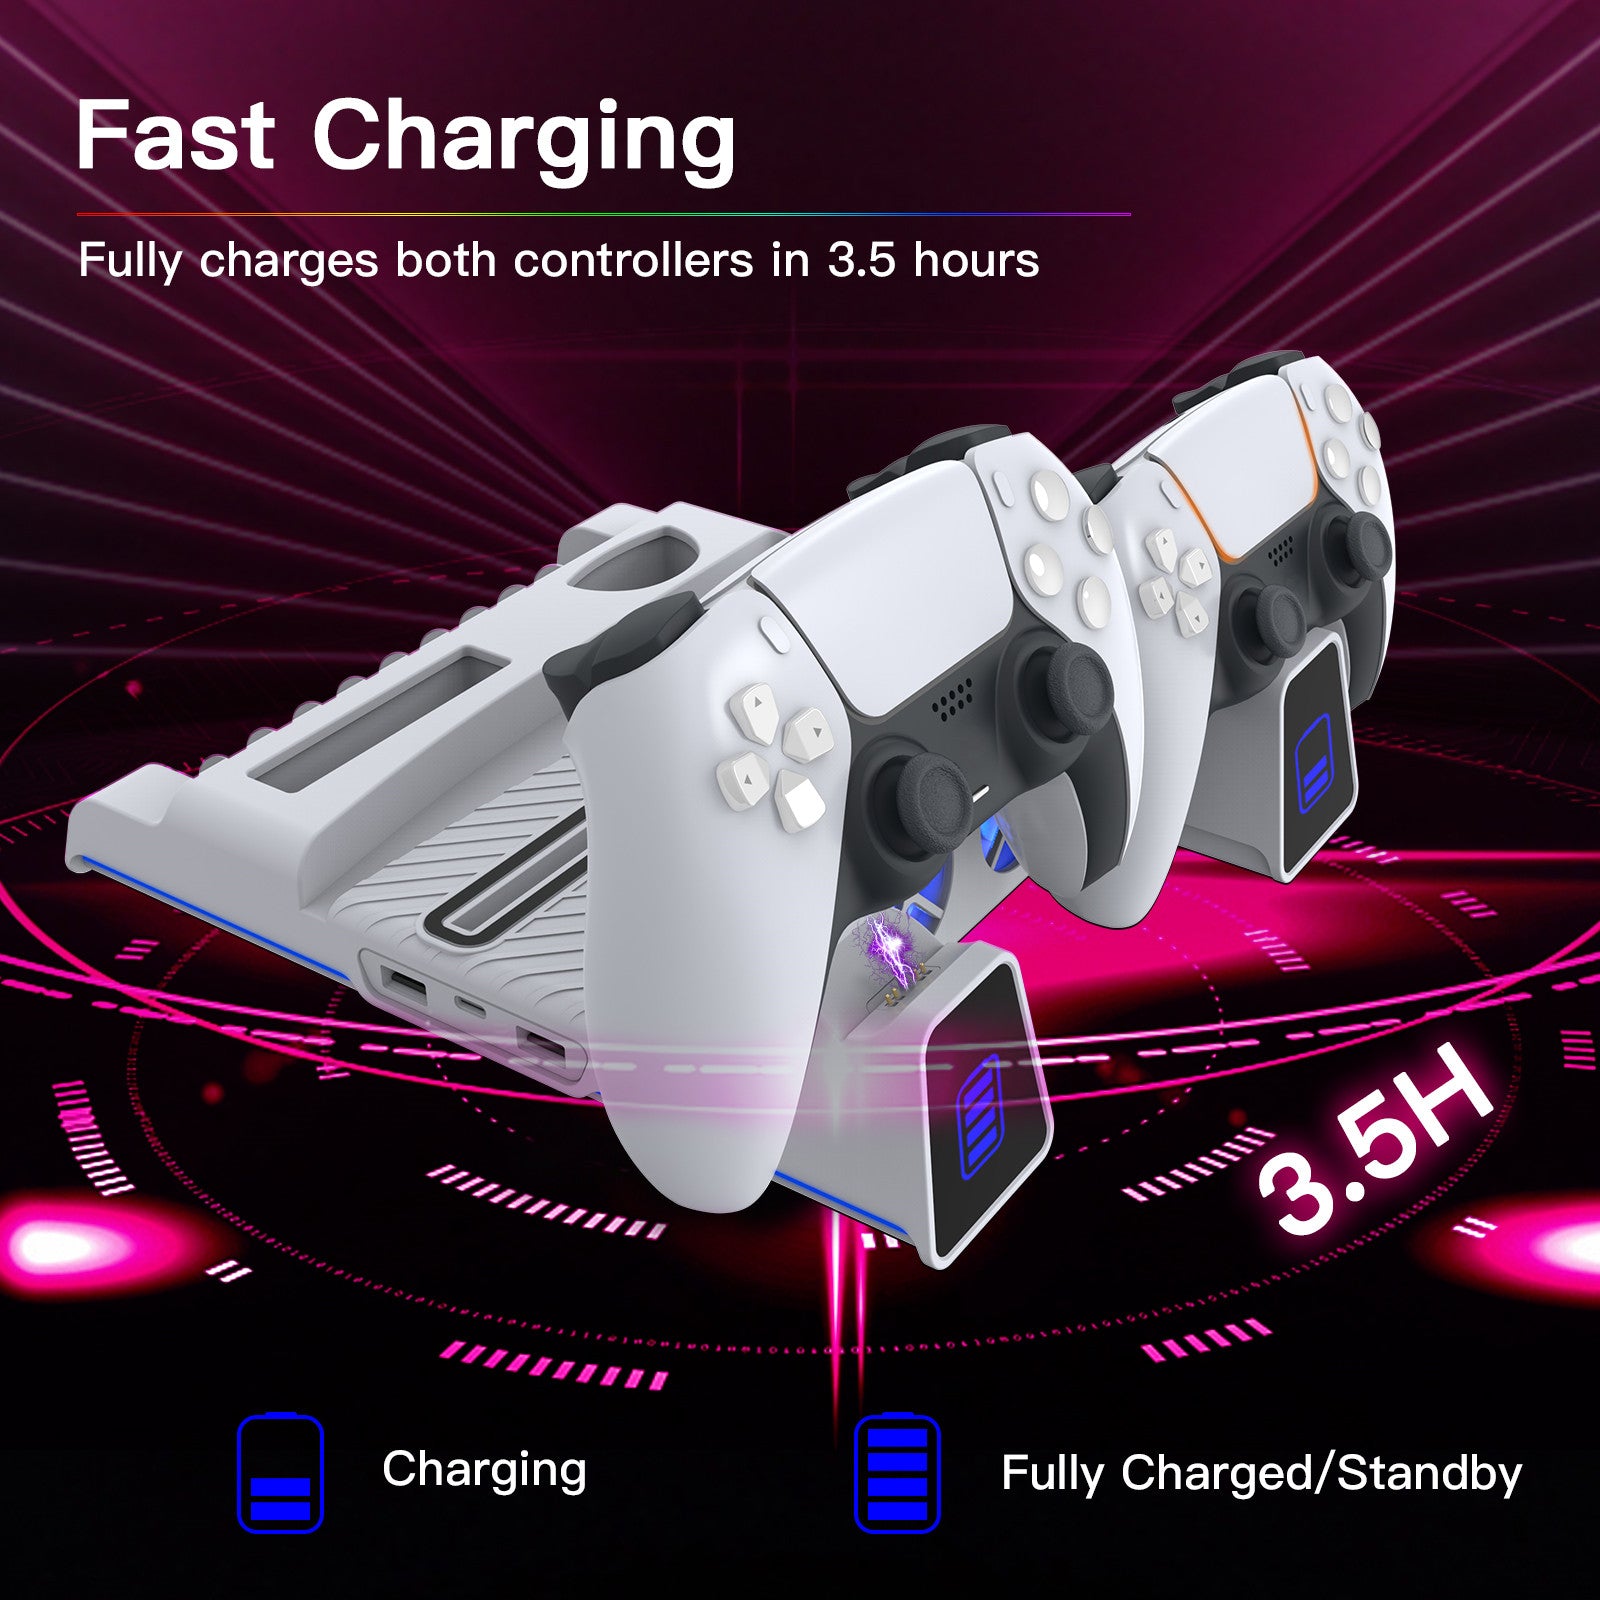 Two DualSense controllers are fully charged in 3.5 hours. RGB strip shows steady blue when full.